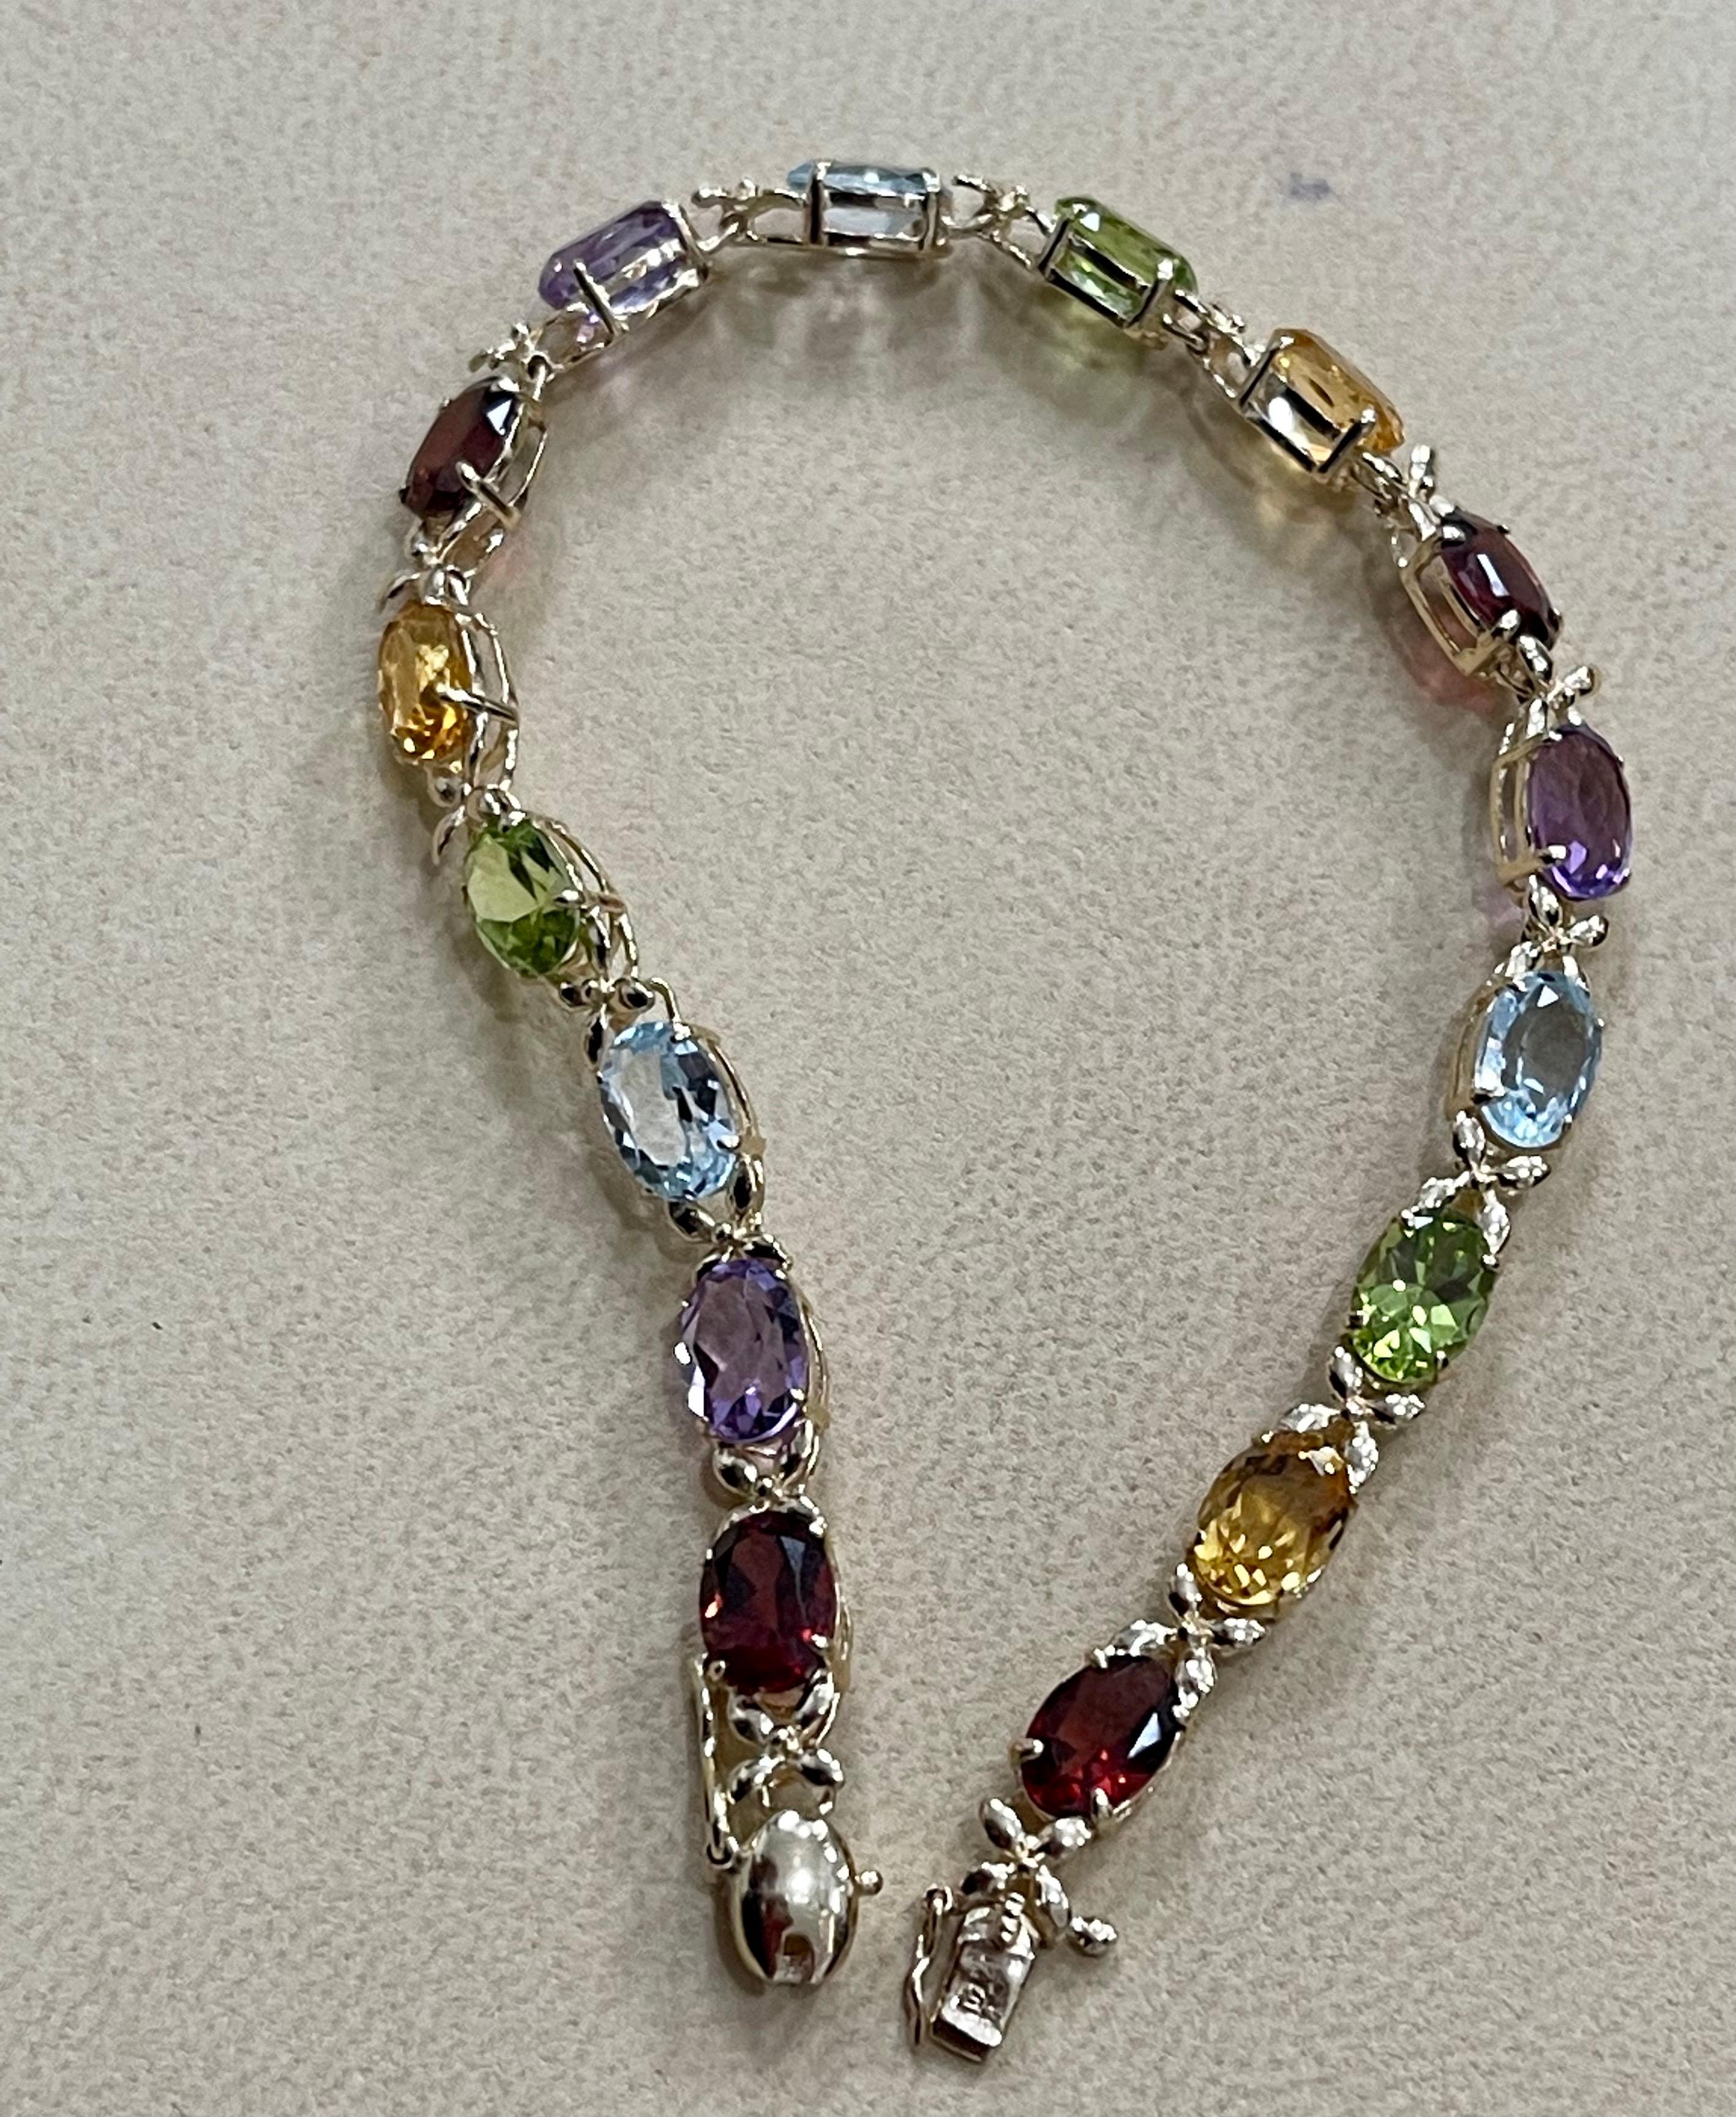  This exceptionally affordable Tennis  bracelet has  16 stones of oval  Blue Topaz ,Peridot, Garnet, Citrine, and Amethyst  . Each stone is spaced by a X shape structure made by Gold. The weight of the multi semi precious  is approximately  9 Carat